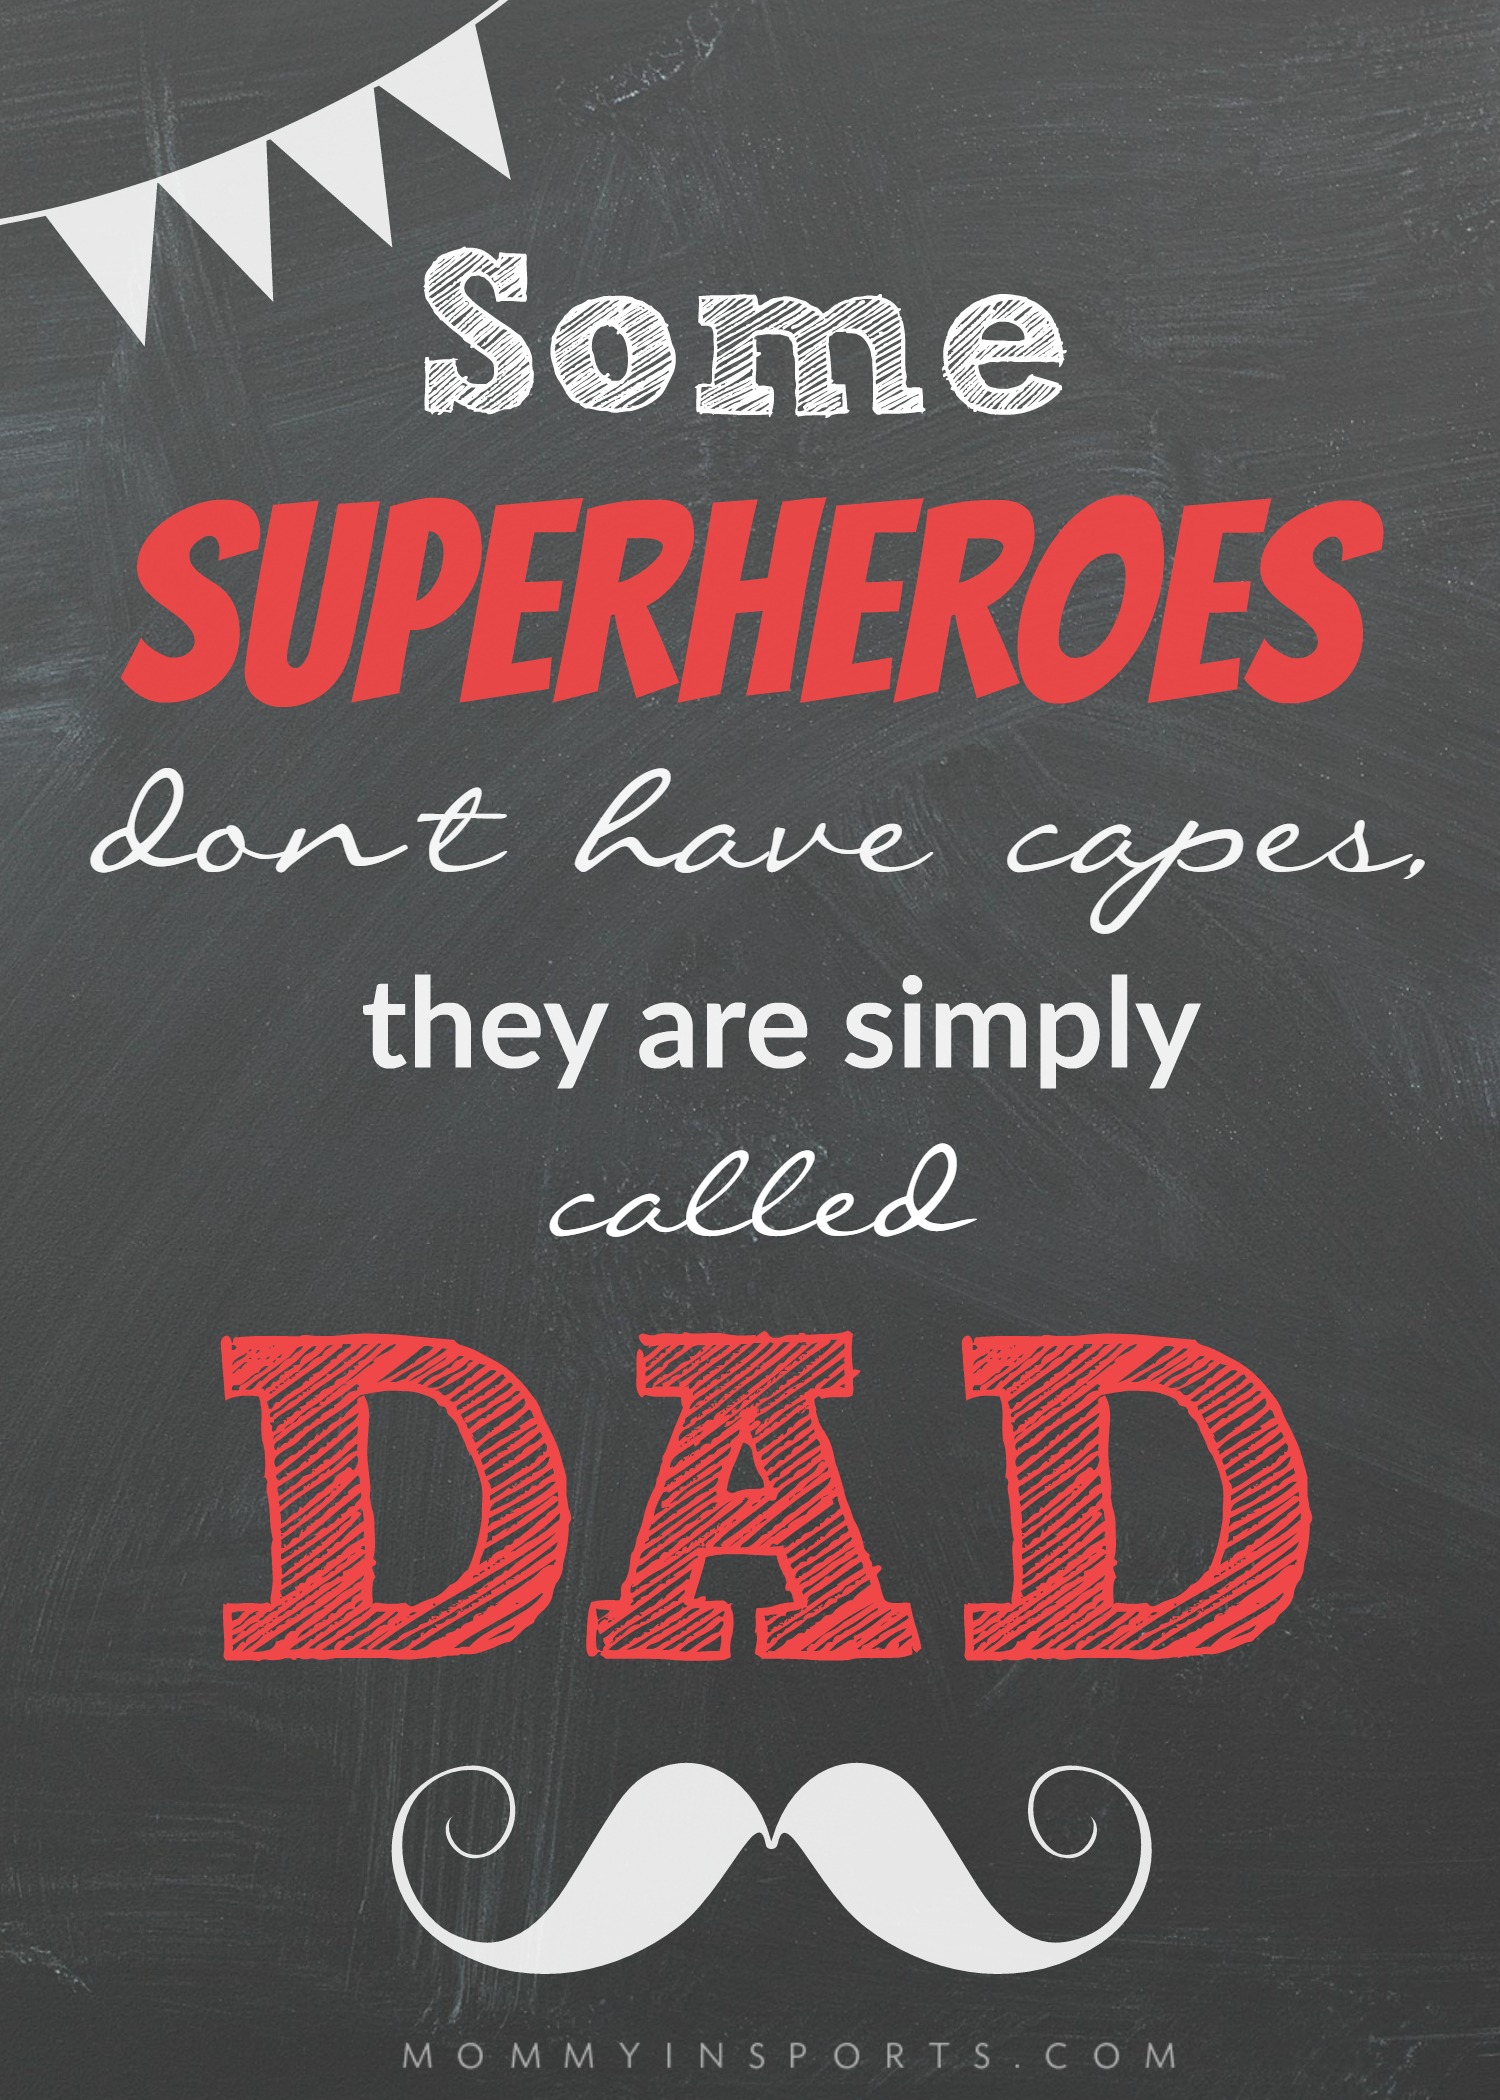 Some Superheroes don't have capes, they are simply called dad